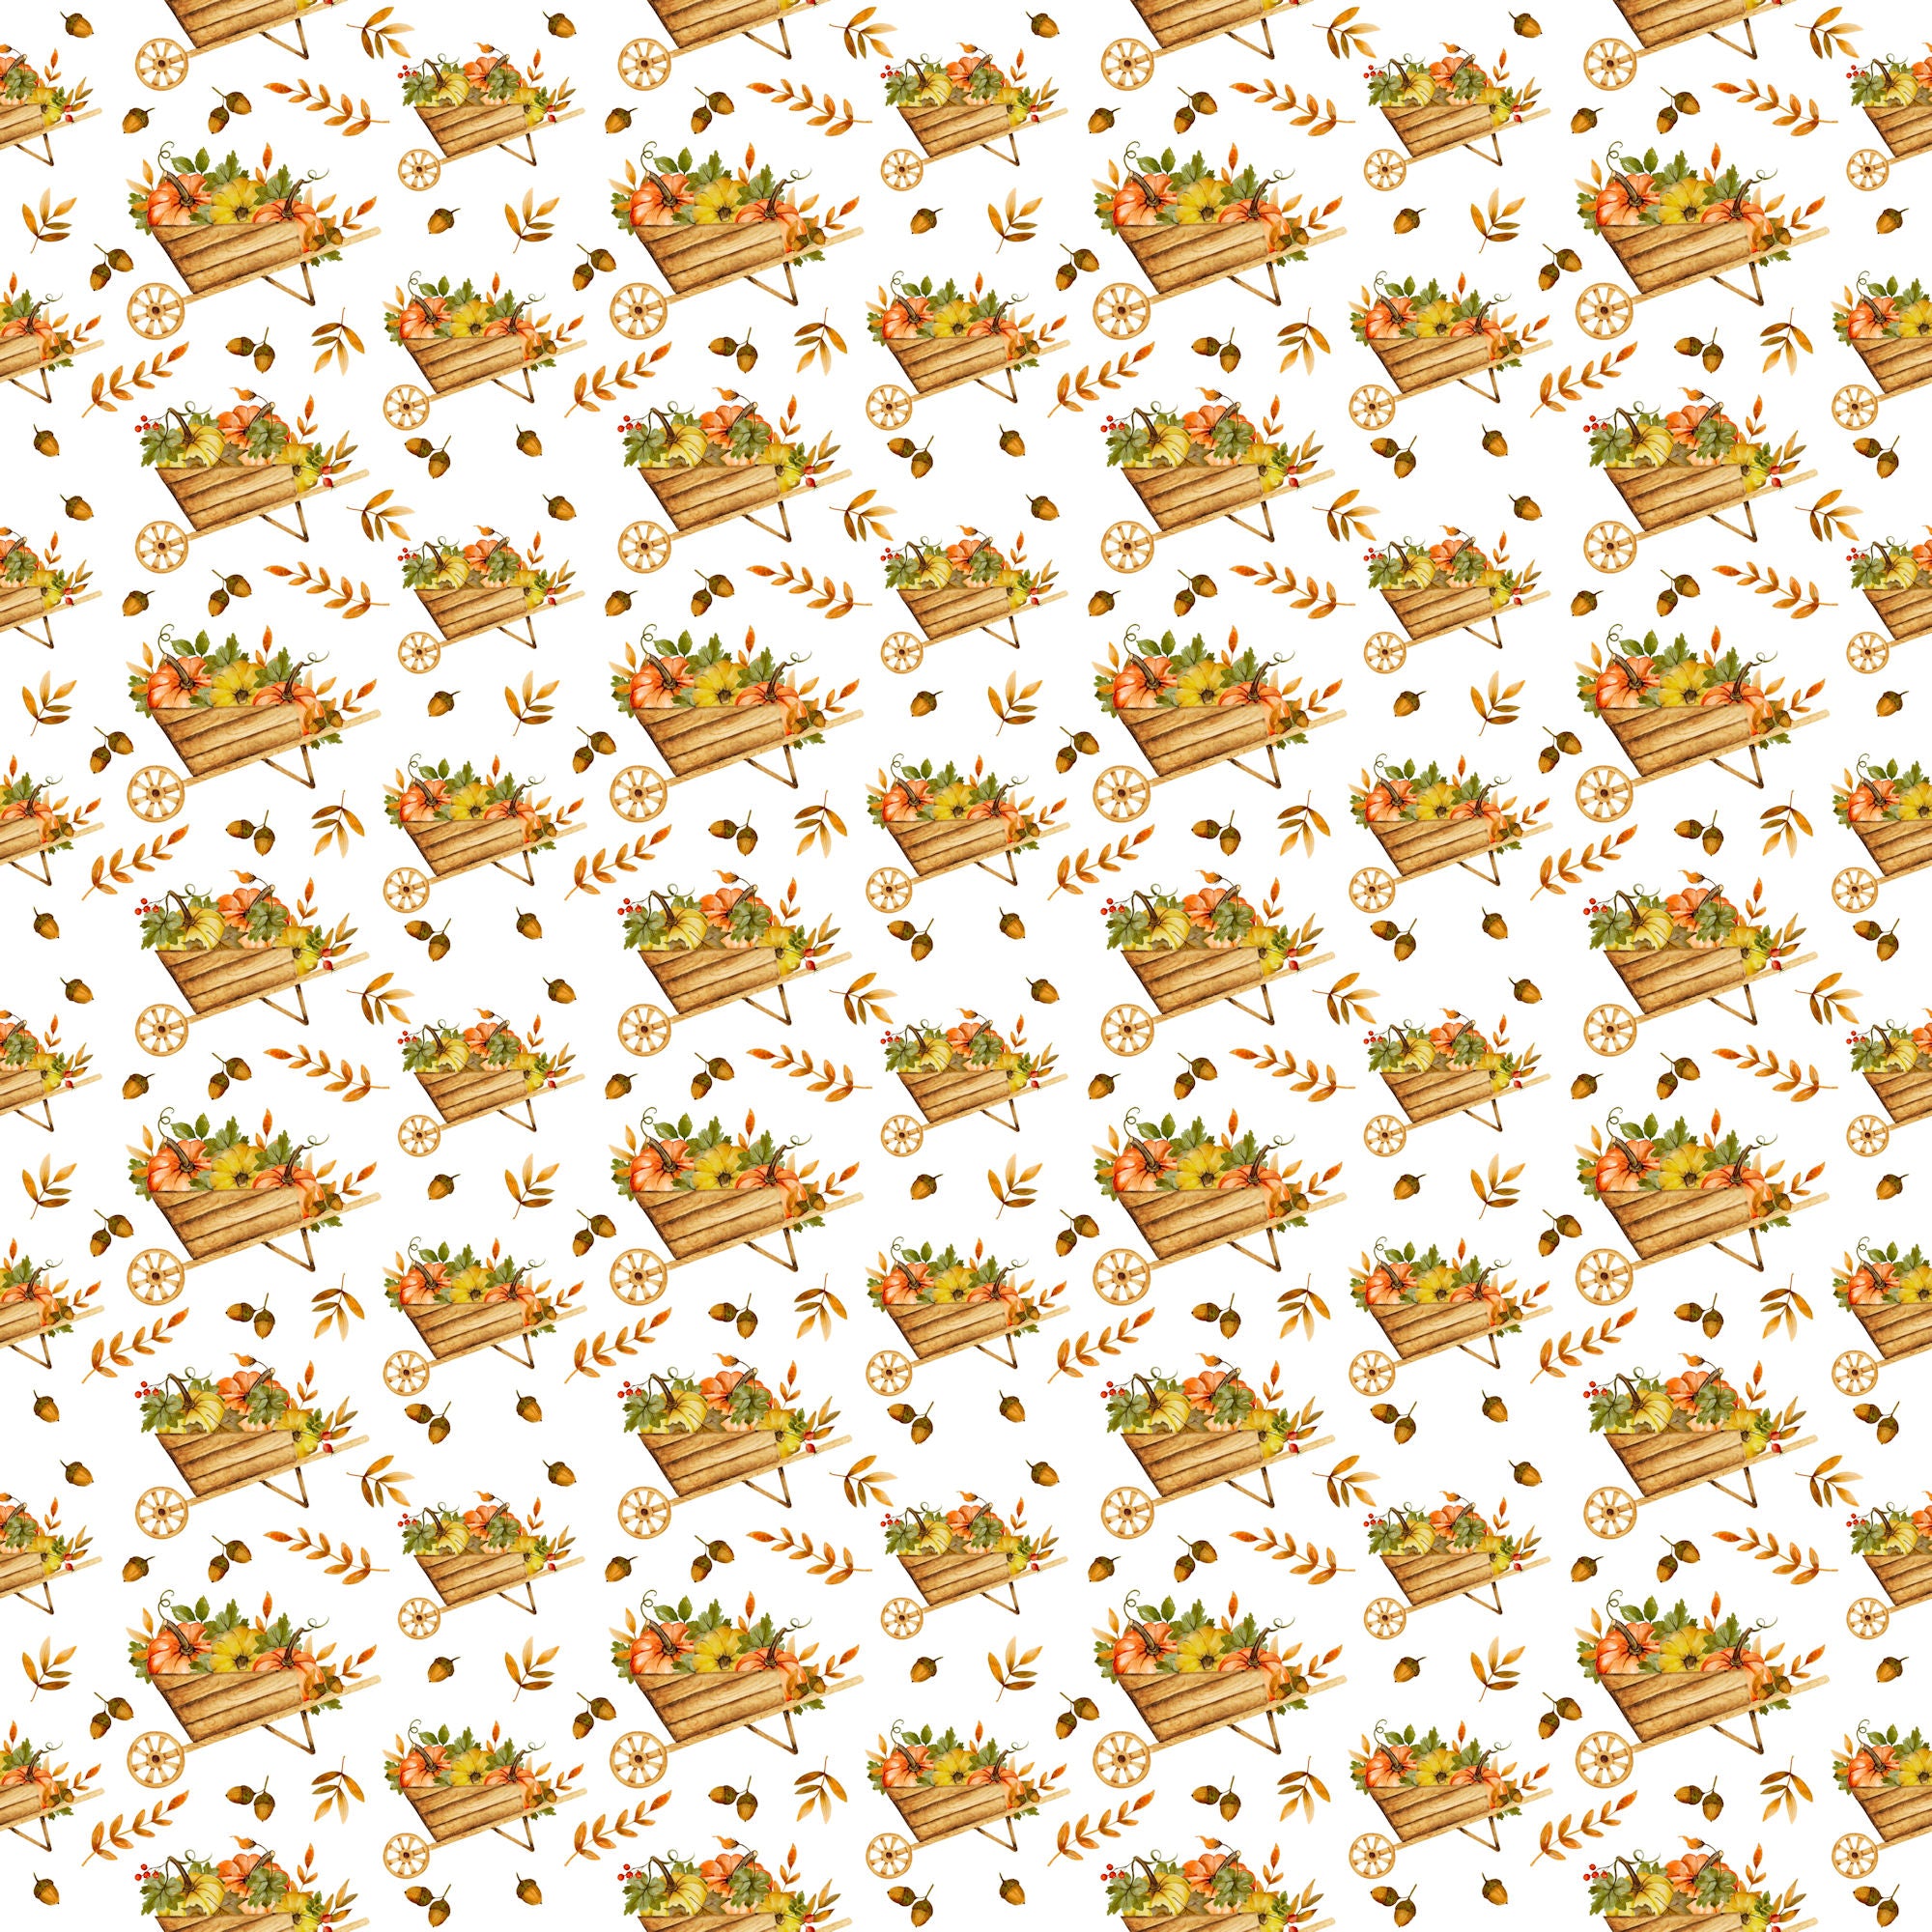 Favorite Fall Collection Barrel of Pumpkins 12 x 12 Double-Sided Scrapbook Paper by SSC Designs